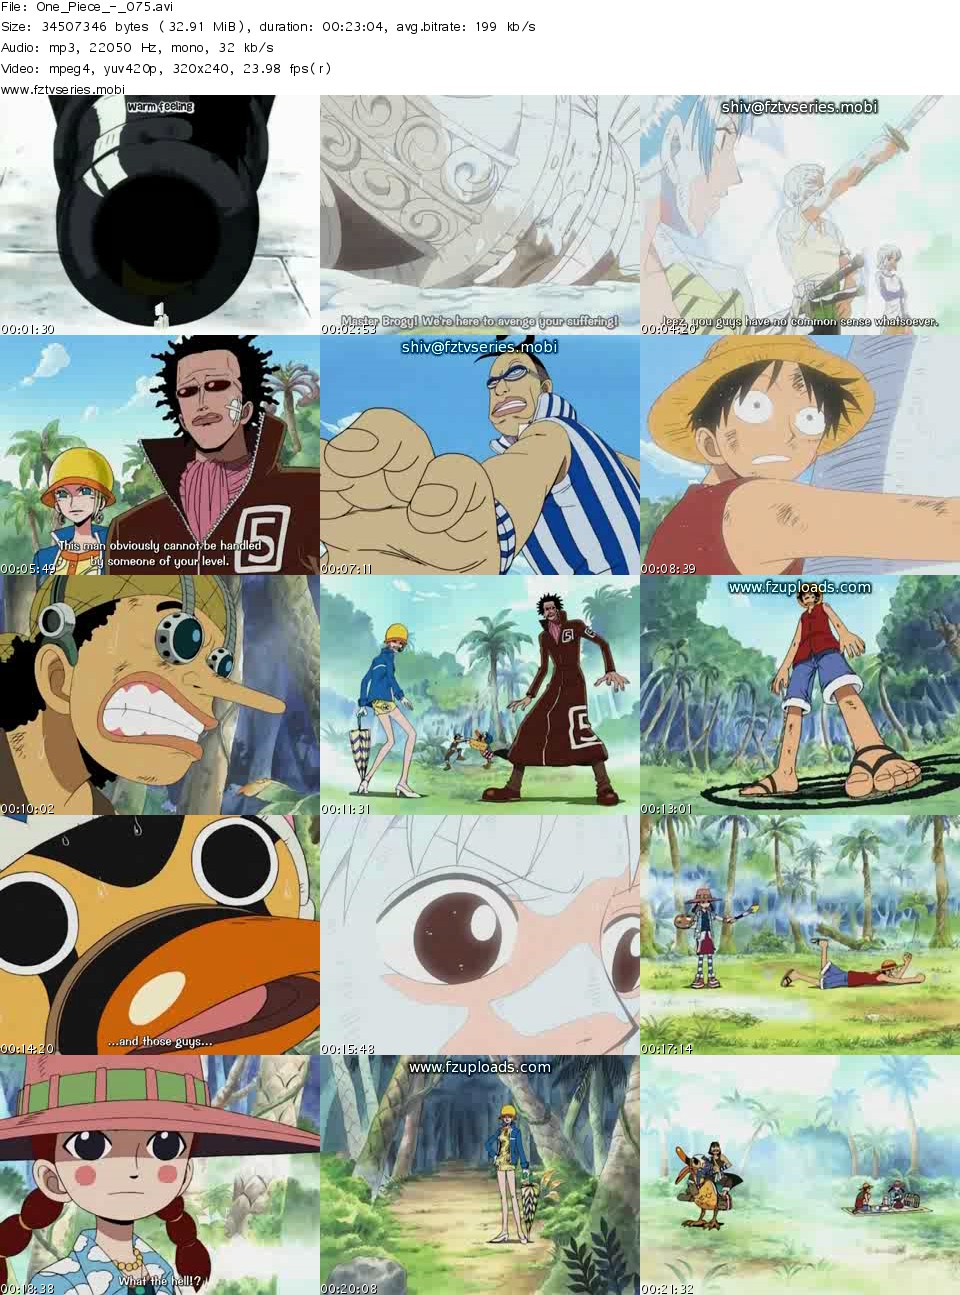 donload one piece mp4